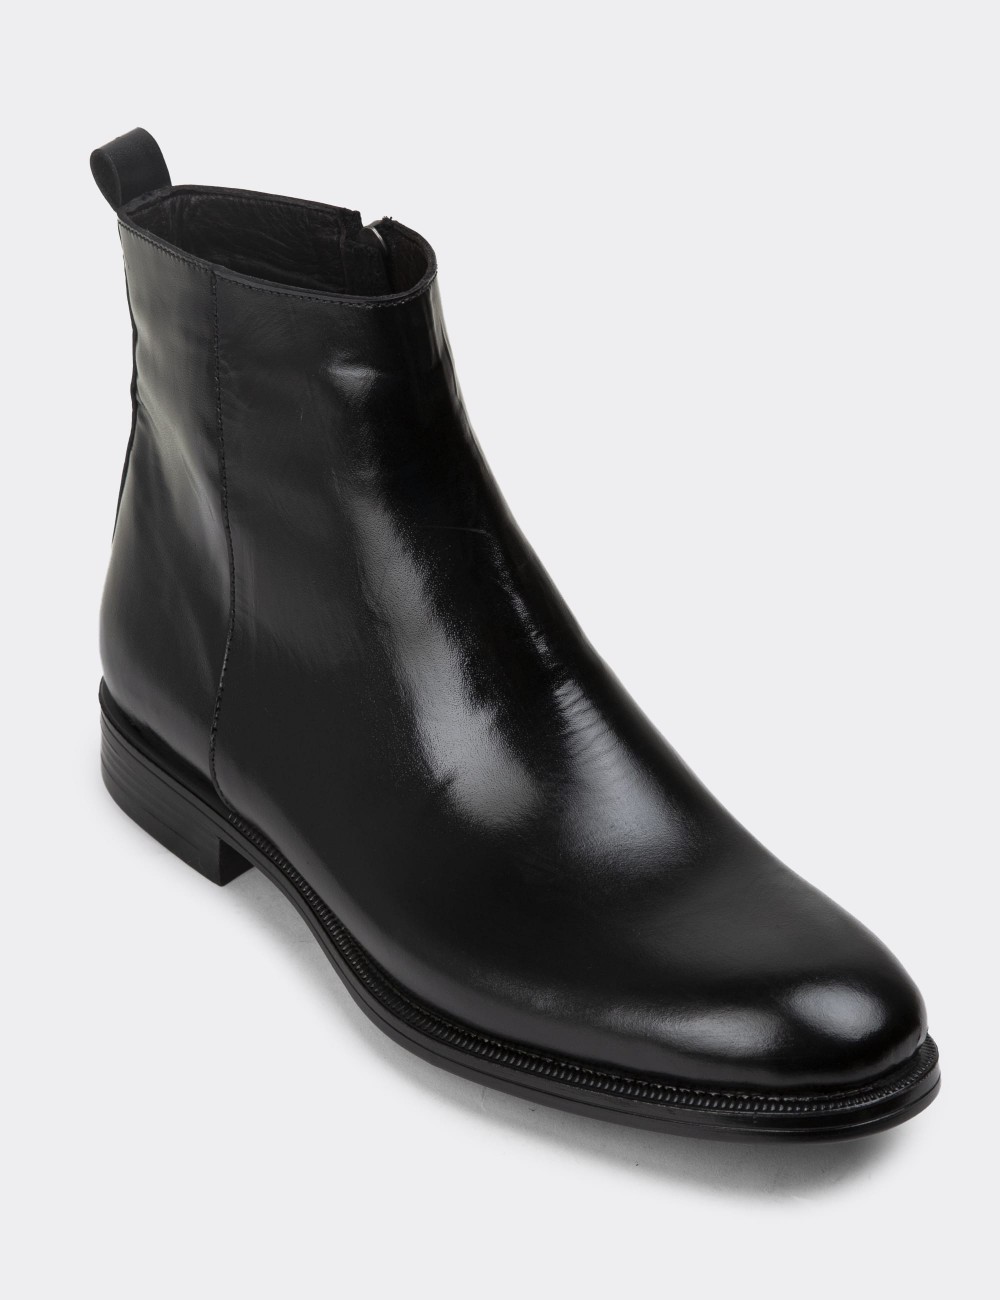 Black Leather Boots - 01921MSYHC04